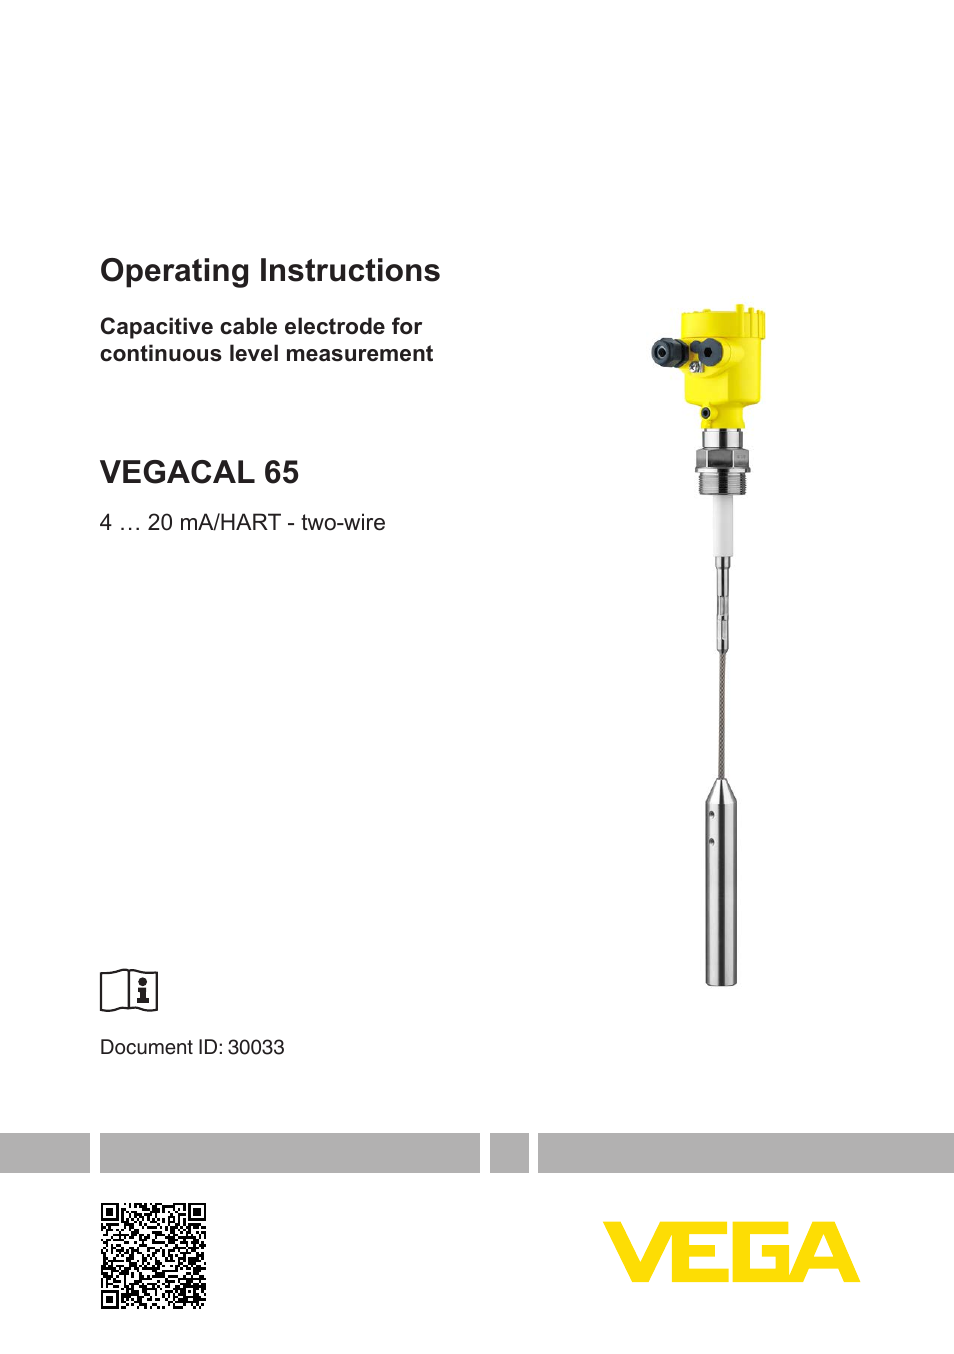 VEGACAL 65 4 … 20 mA_HART - two-wire